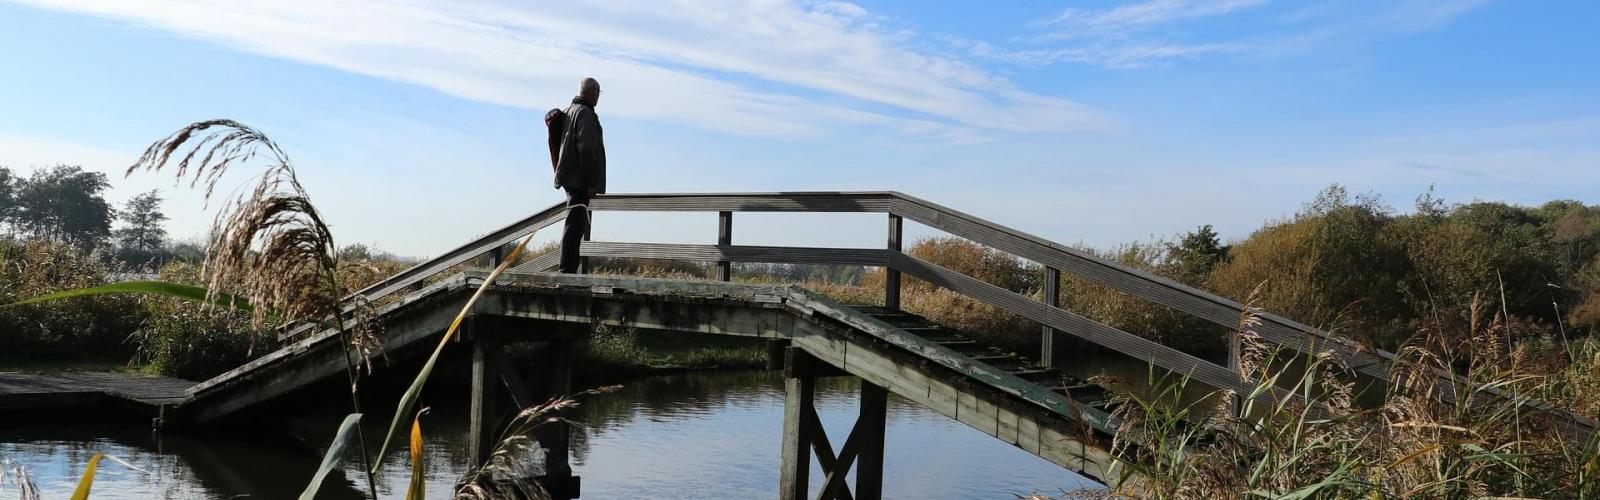 Adult male on a wooden bridge over a river looking out at the scenery